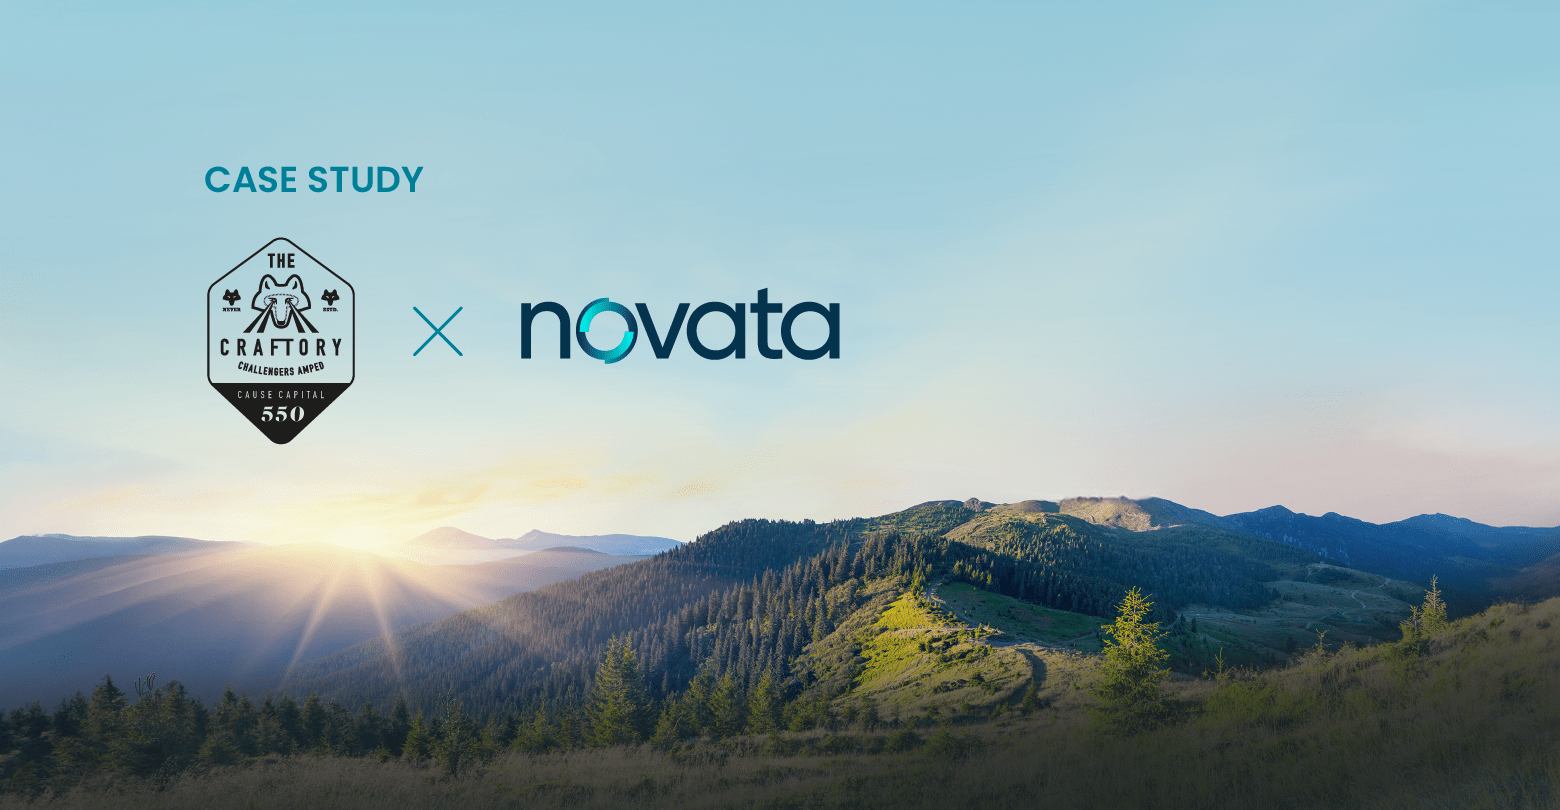 Case Study: The Craftory and Novata logos against background image of mountaintops.